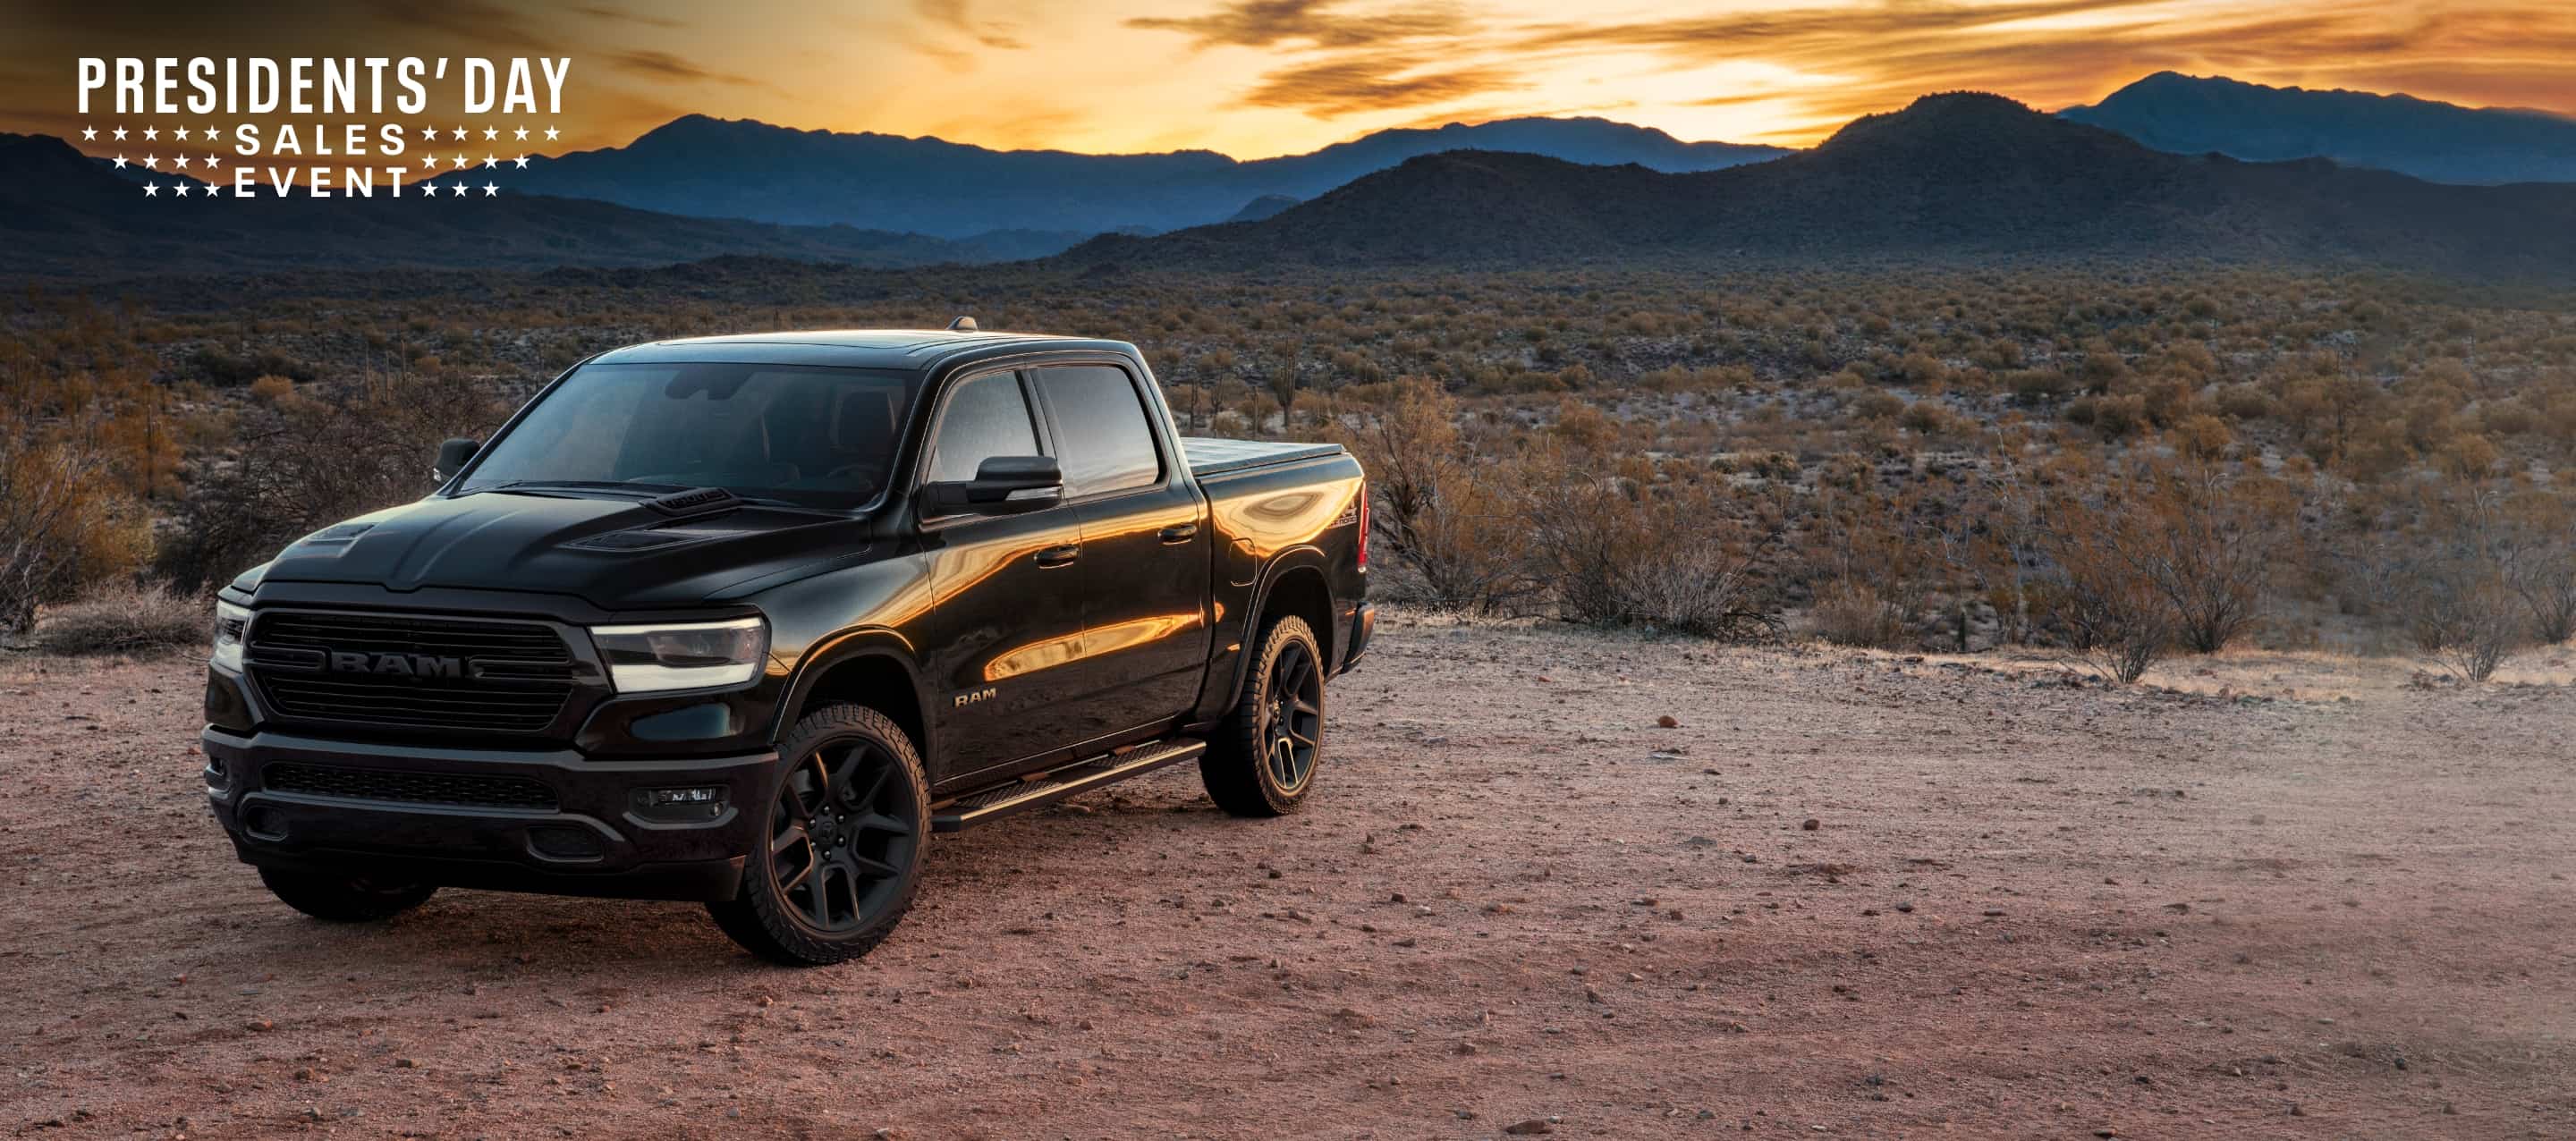 An angled profile of a black 2023 Ram 1500 Laramie 4x4 Crew Cab parked on a clearing in the desert with mountains and a sunset in the background. The Presidents' Day Sales Event logo.